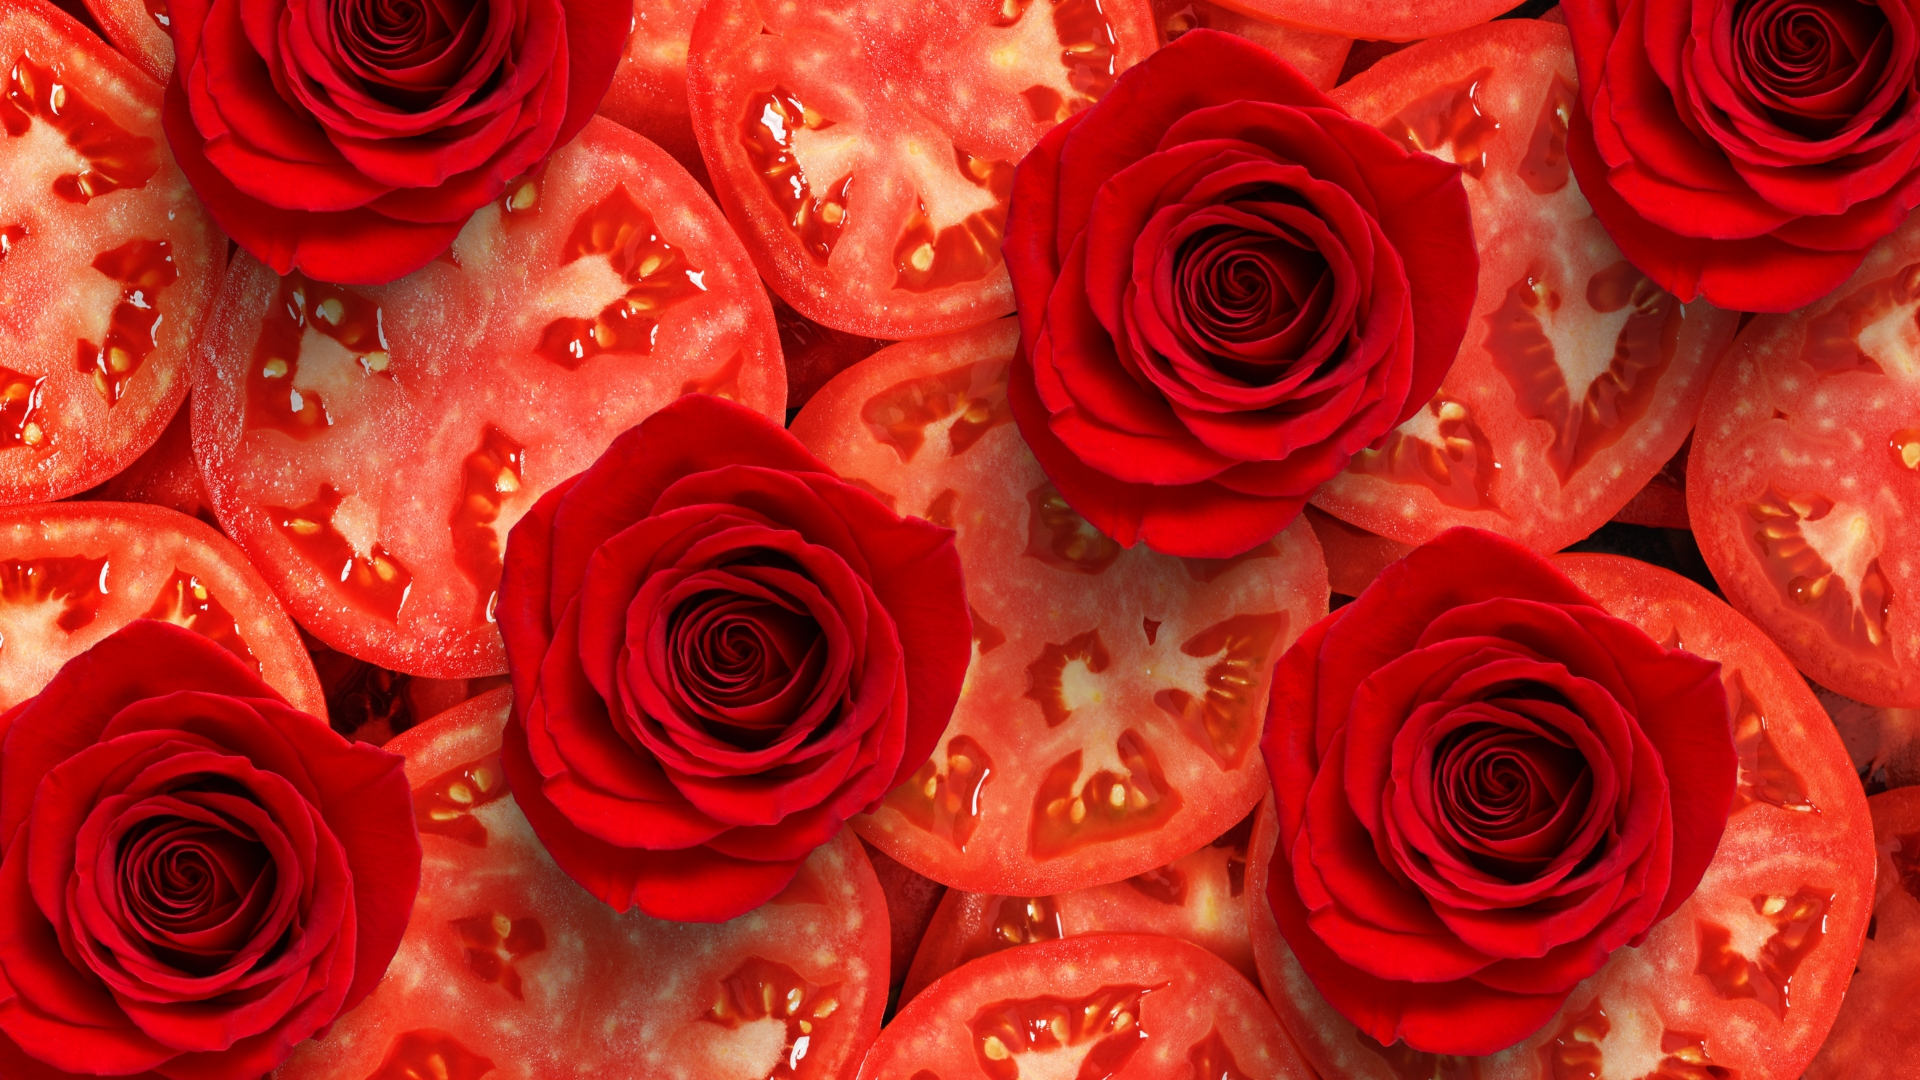 Plant Roses In Tomato Slices And Watch The Magic Happen! 